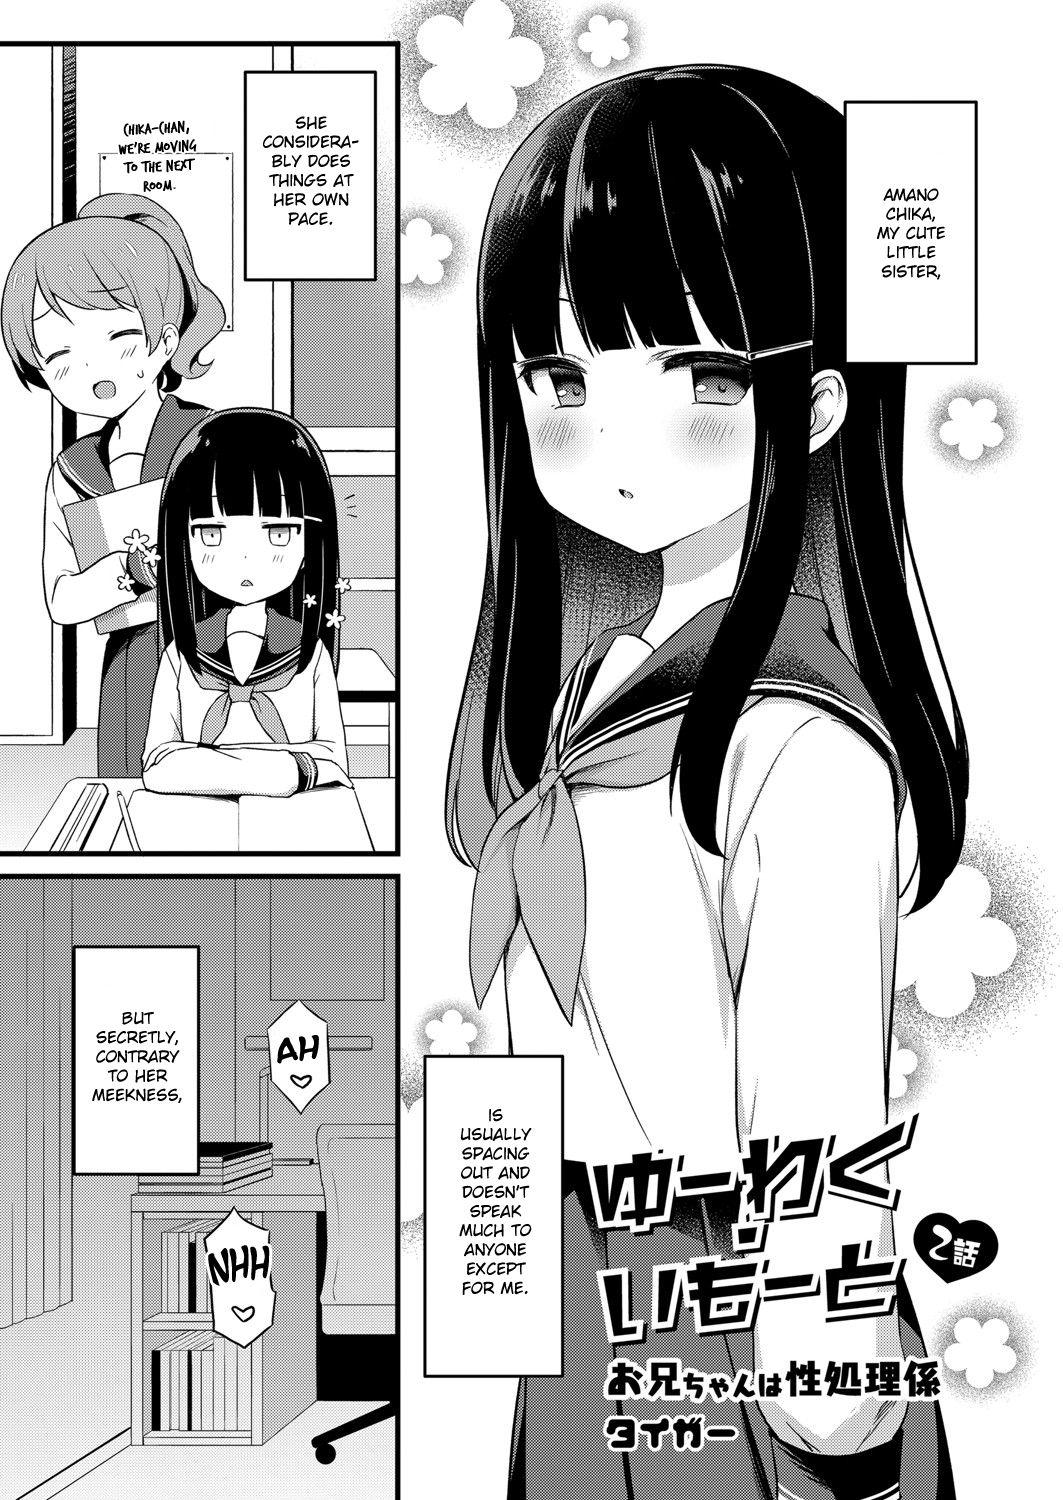 Pure 18 [Tiger] Yuuwaku・Imouto #2 Onii-chan wa seishori gakari | Little Sister Temptation #2 Onii-chan is in Charge of My Libido Management (COMIC Reboot Vol. 07) [English] [Digital] Real Couple - Picture 1